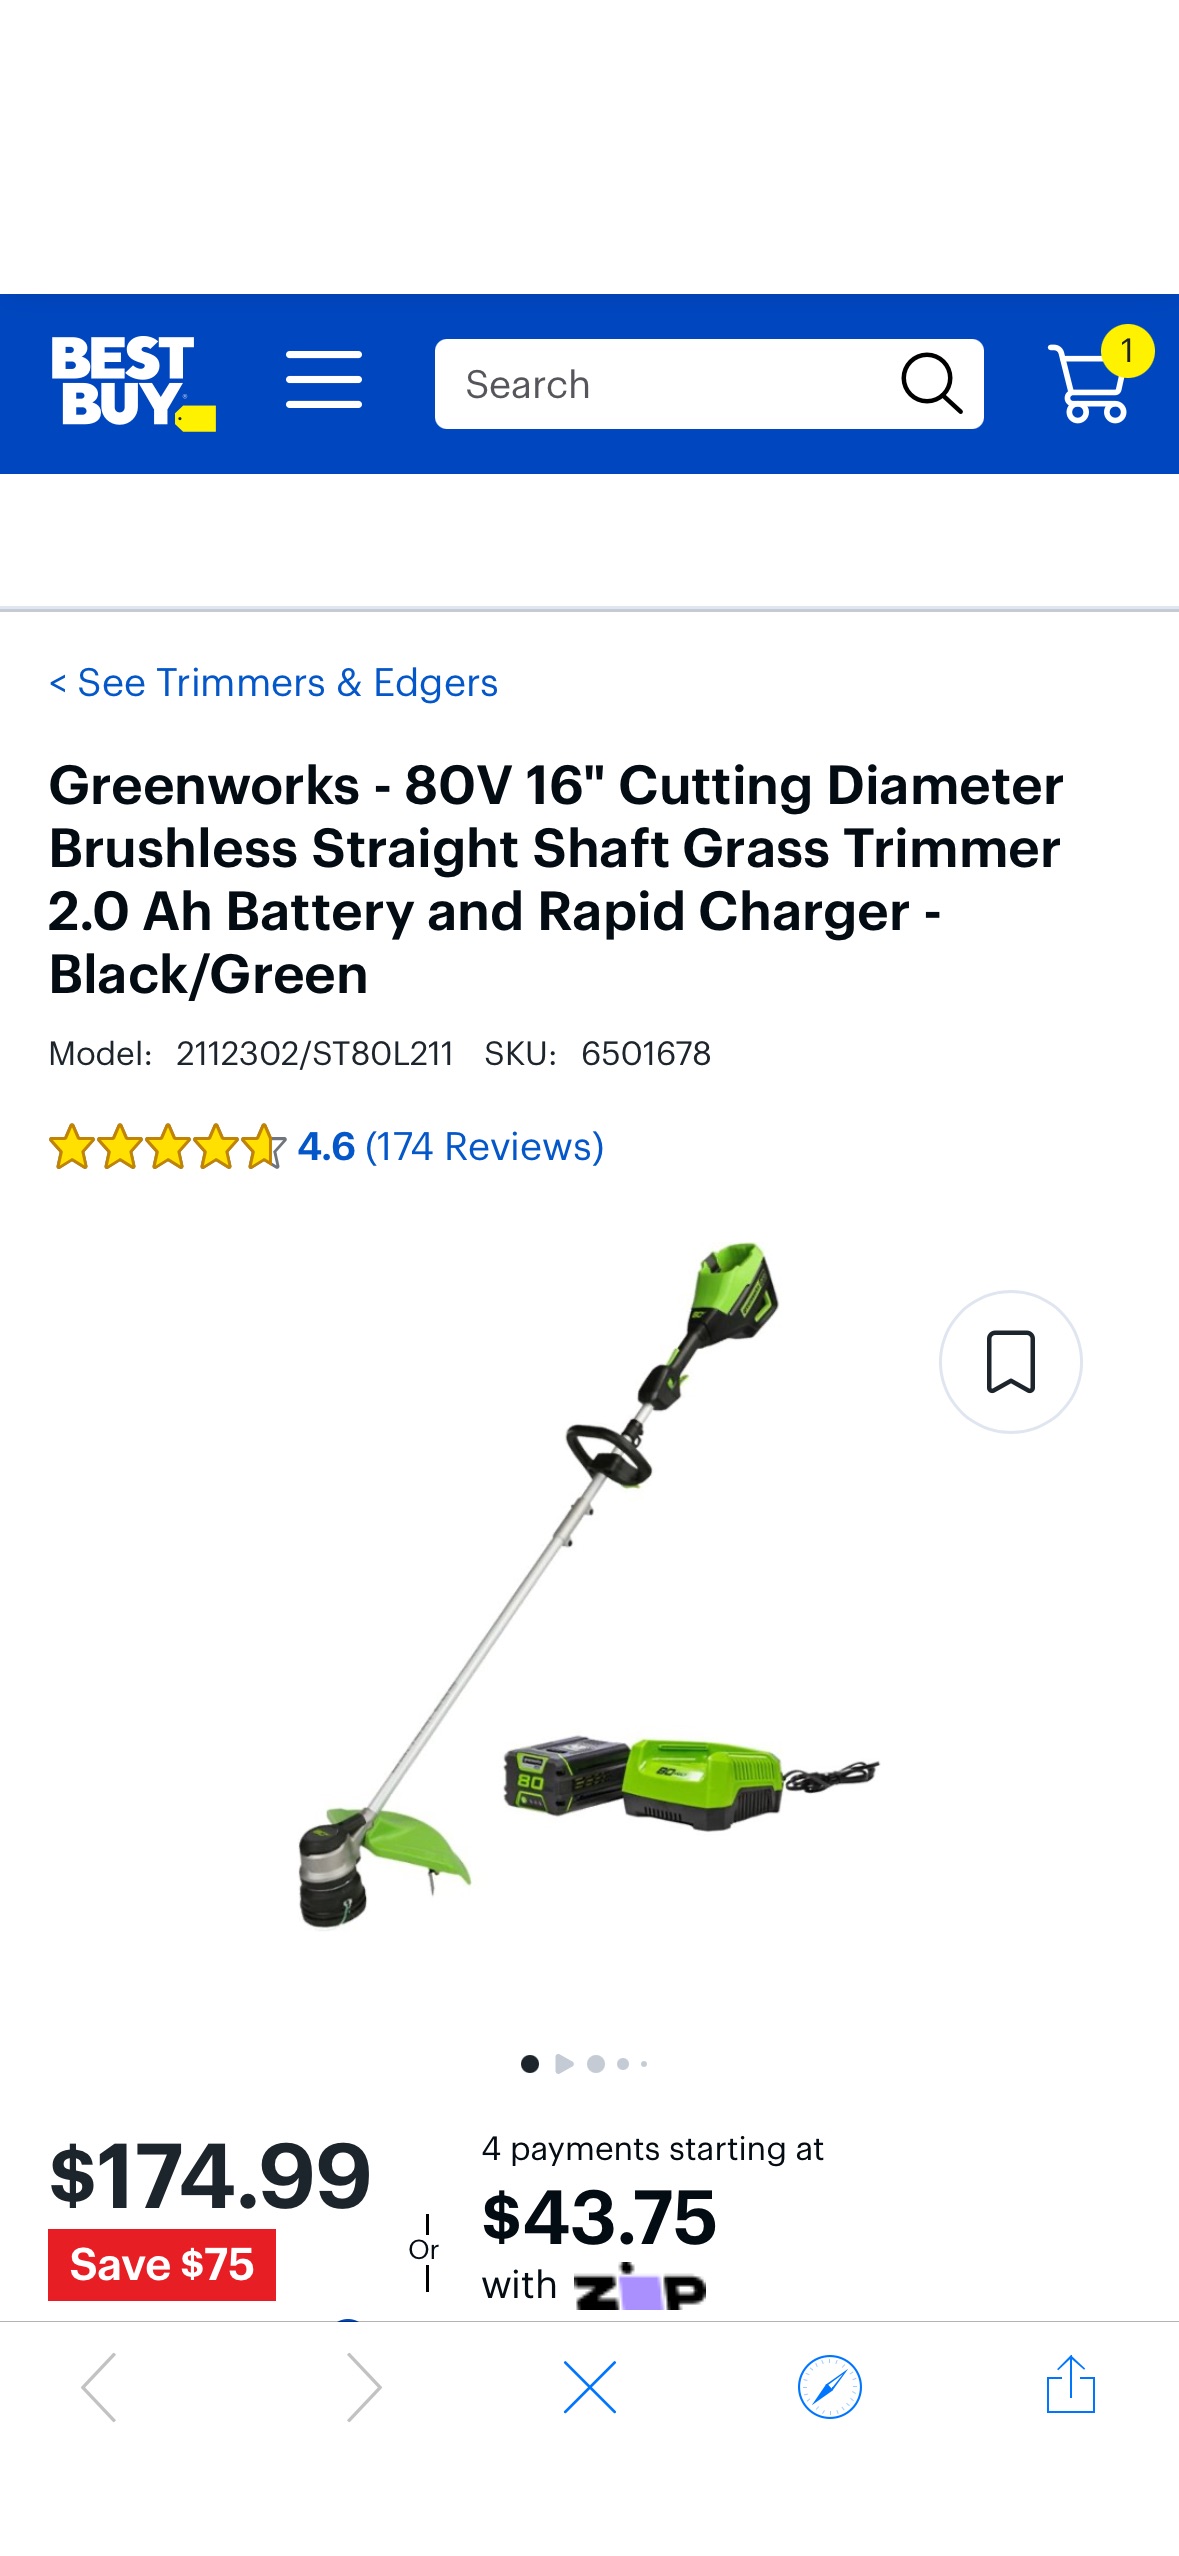 Greenworks 80V 16" Cutting Diameter Brushless Straight Shaft Grass Trimmer 2.0 Ah Battery and Rapid Charger Black/Green 2112302/ST80L211 - Best Buy